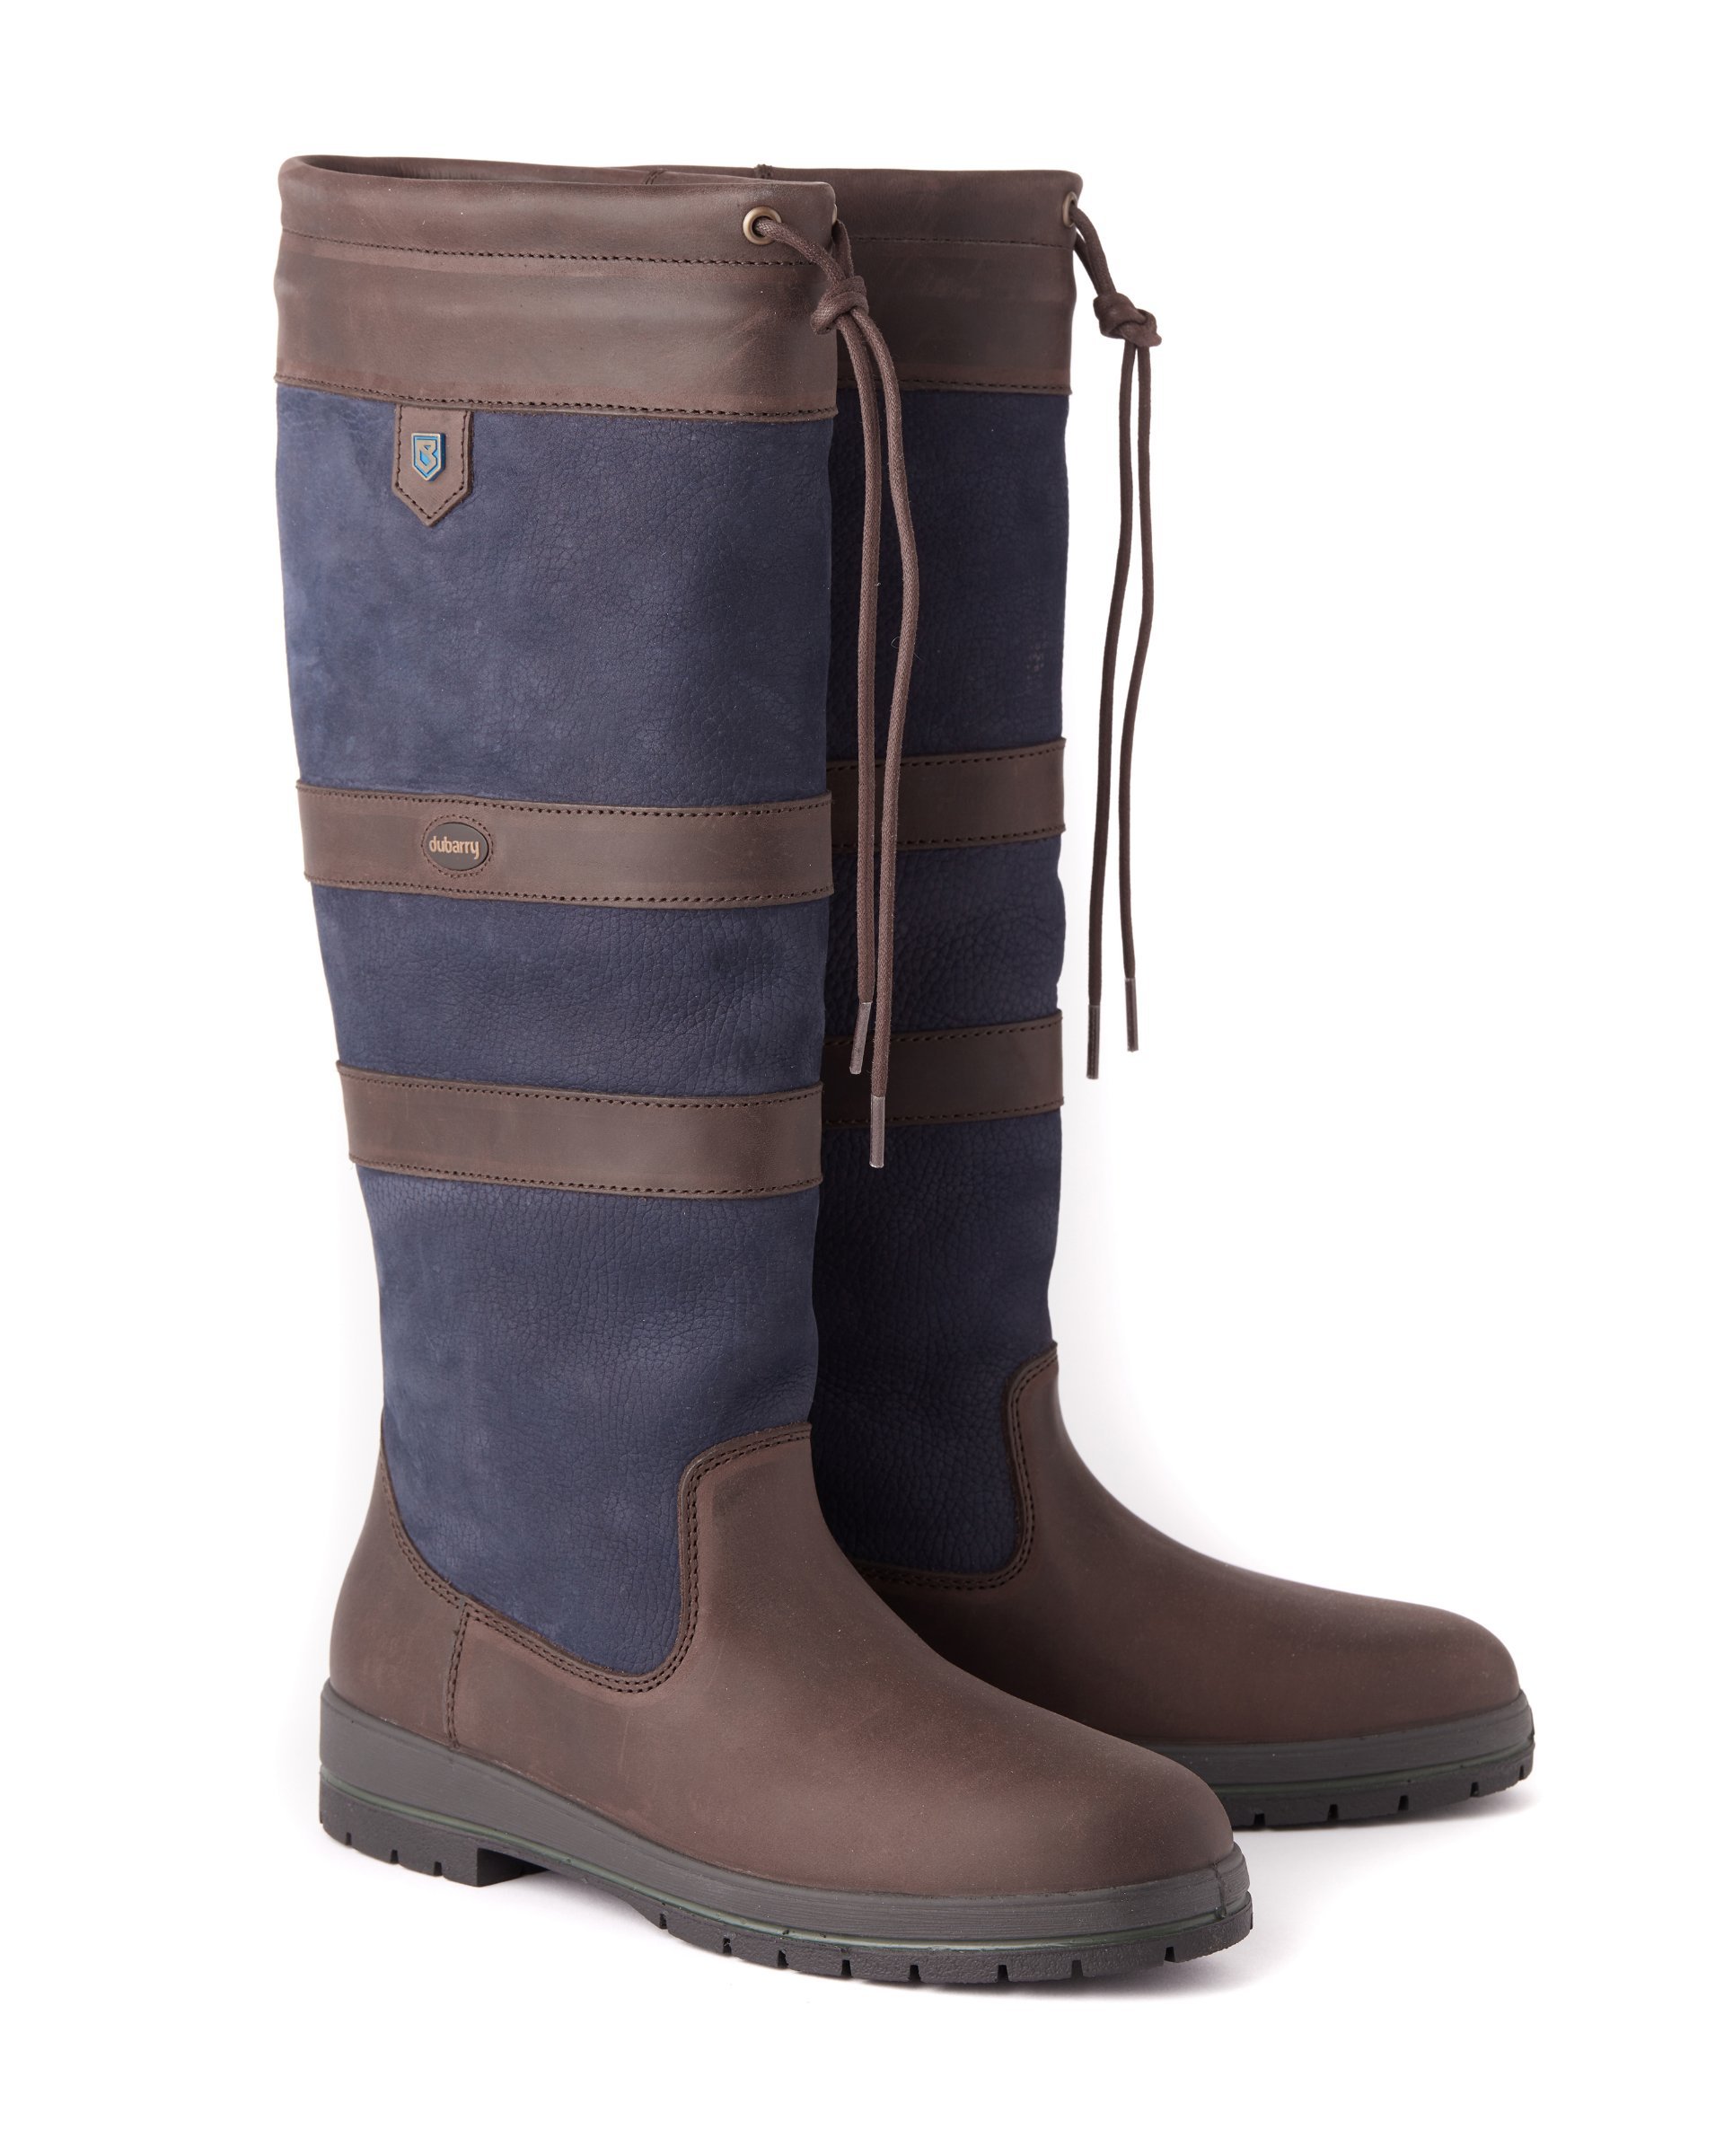 Dubarry - Galway Extrafit - Navy Brown